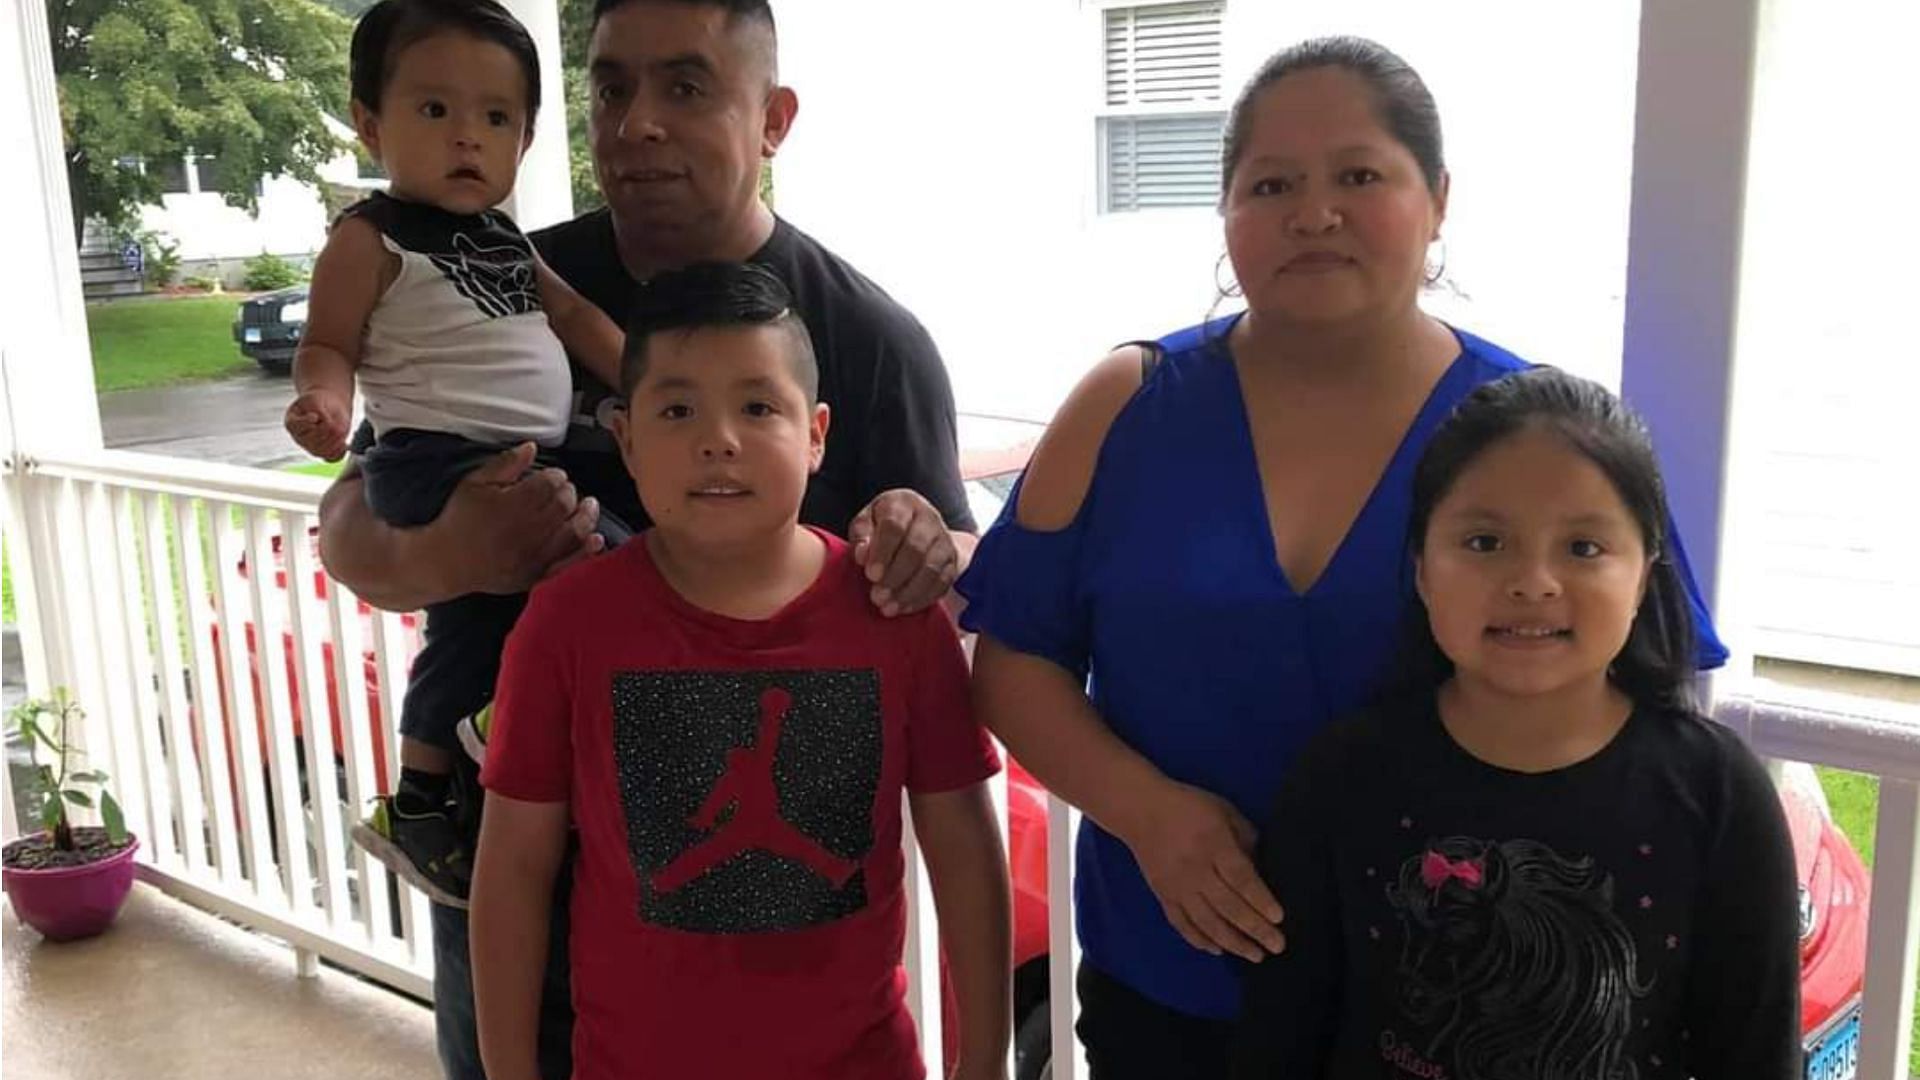 In a tragic murder-suicide case, a Connecticut mother strangled her young children to death before committing suicide (Image via Pedro Panjon/ Facebook)